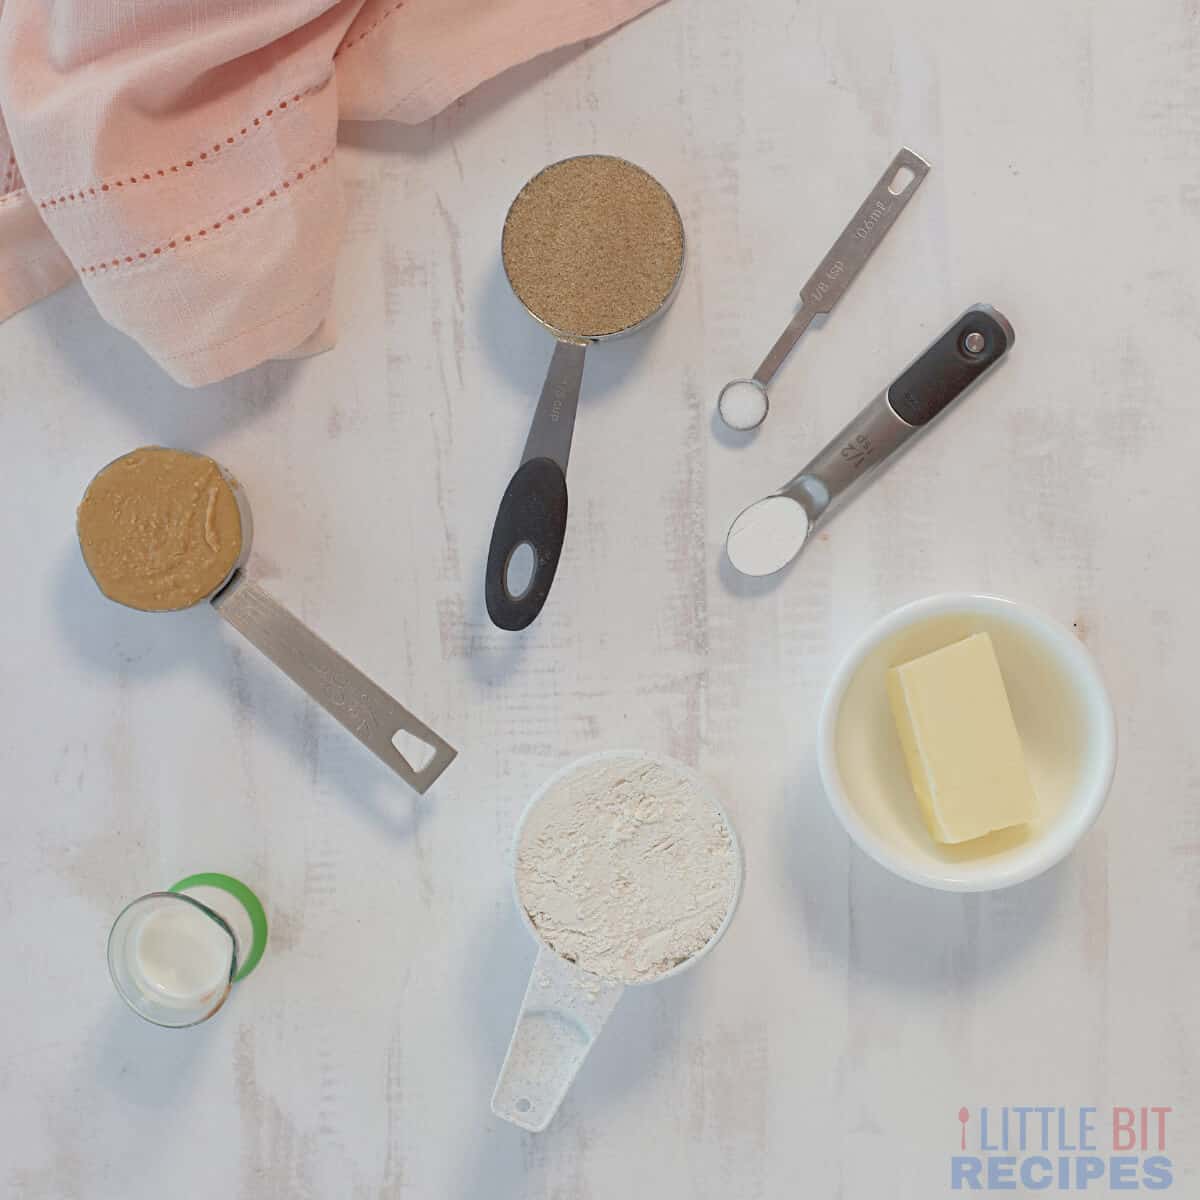 ingredients for the peanut butter cookies.